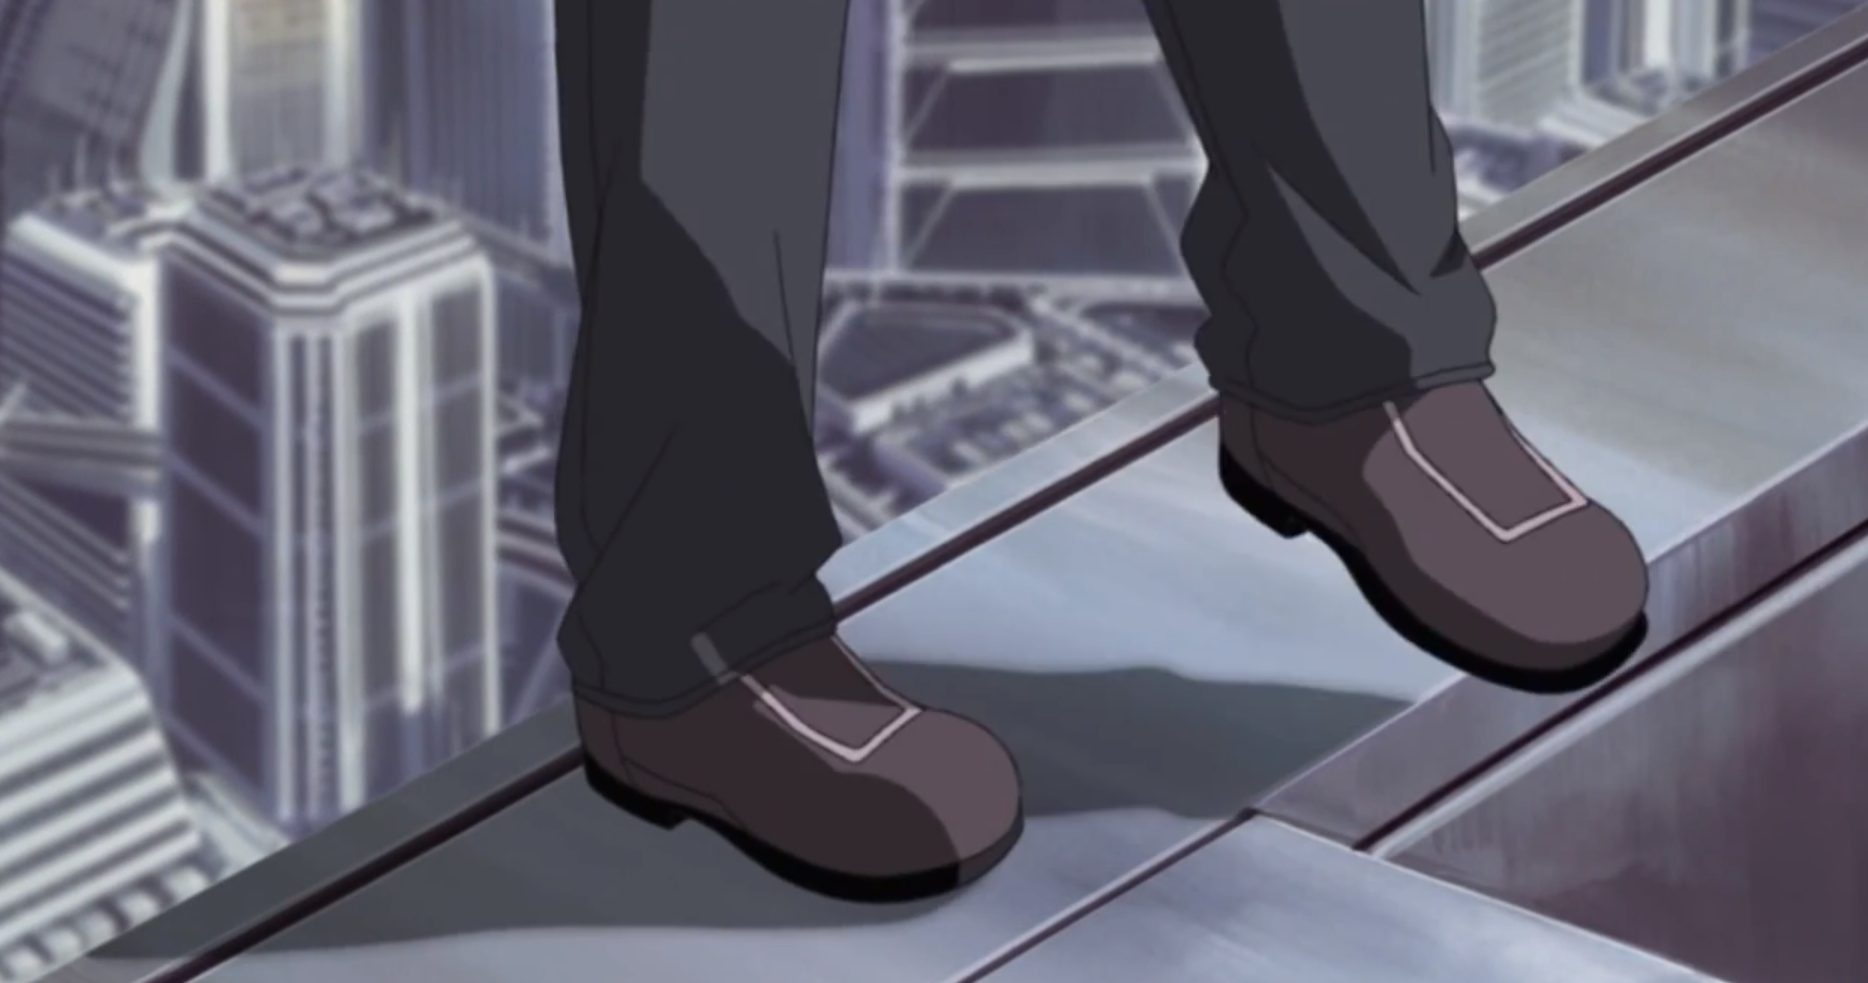 The Major on the roof Motoko Kusanagi, Ghost in the Shell: Stand Alone Complex, episode 20, Production IG, 2002